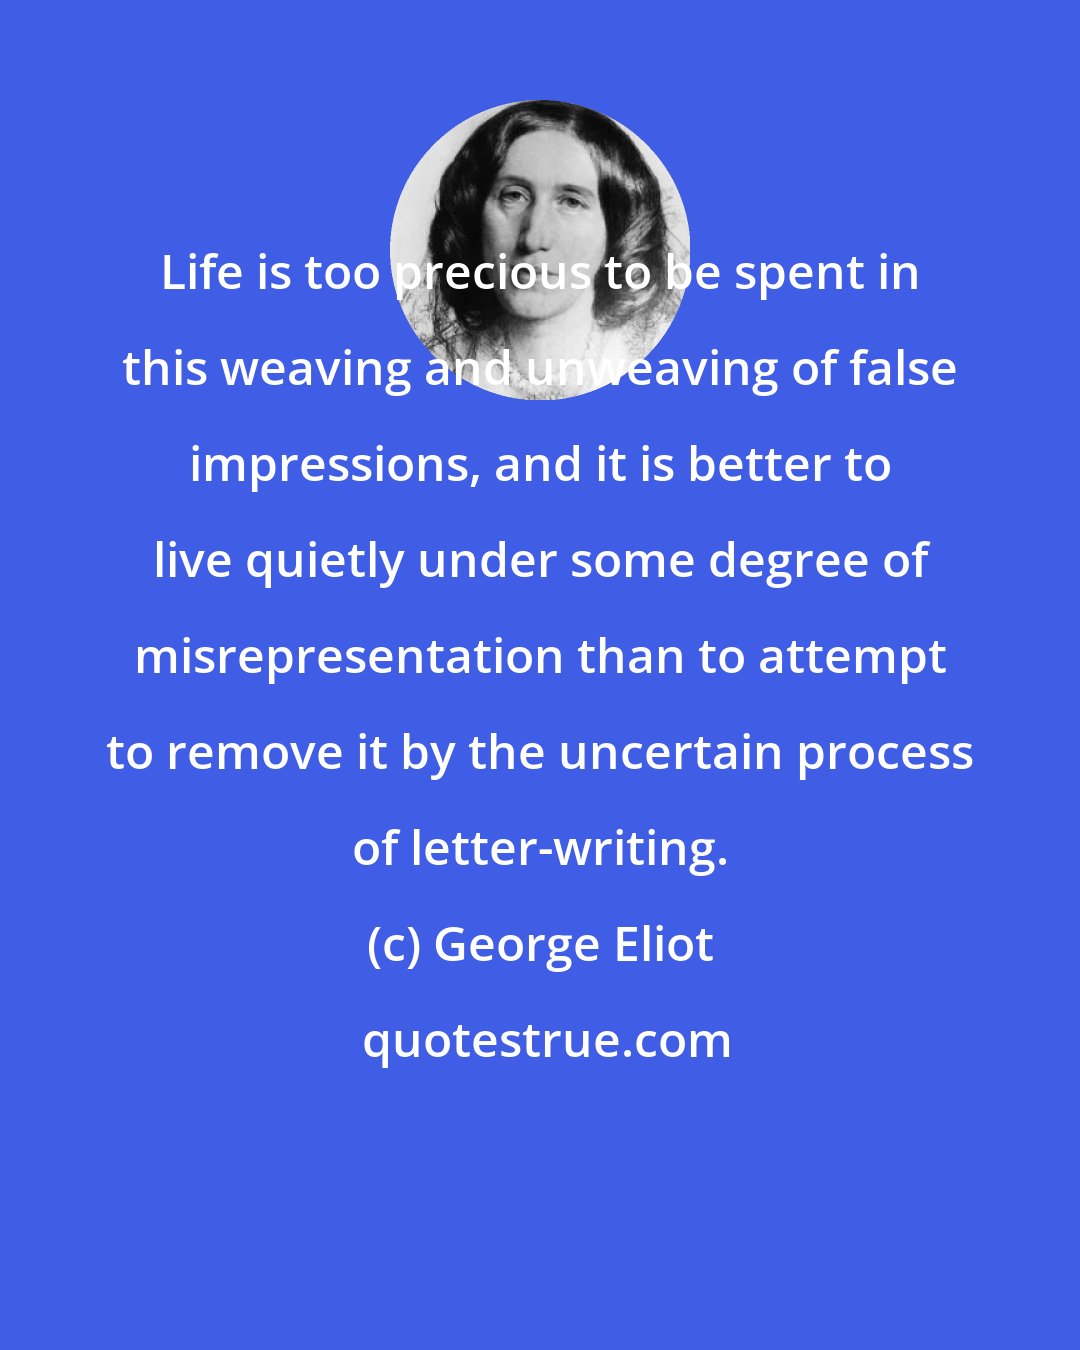 George Eliot: Life is too precious to be spent in this weaving and unweaving of false impressions, and it is better to live quietly under some degree of misrepresentation than to attempt to remove it by the uncertain process of letter-writing.